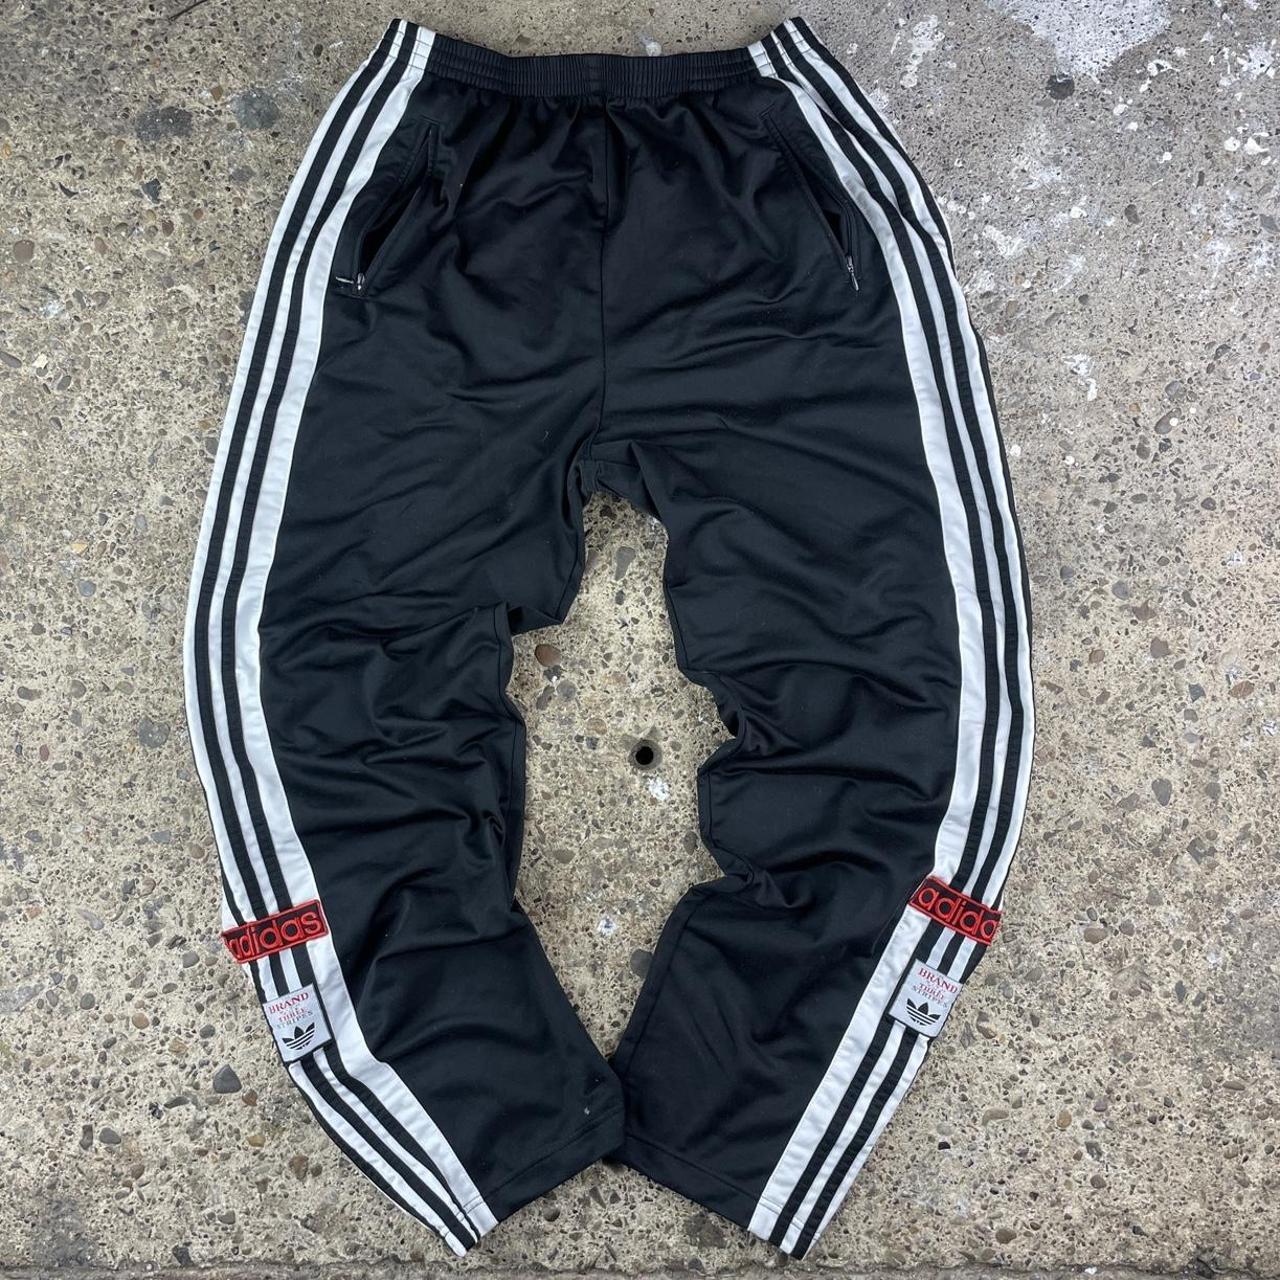 Adidas Men's Black and White Joggers-tracksuits | Depop